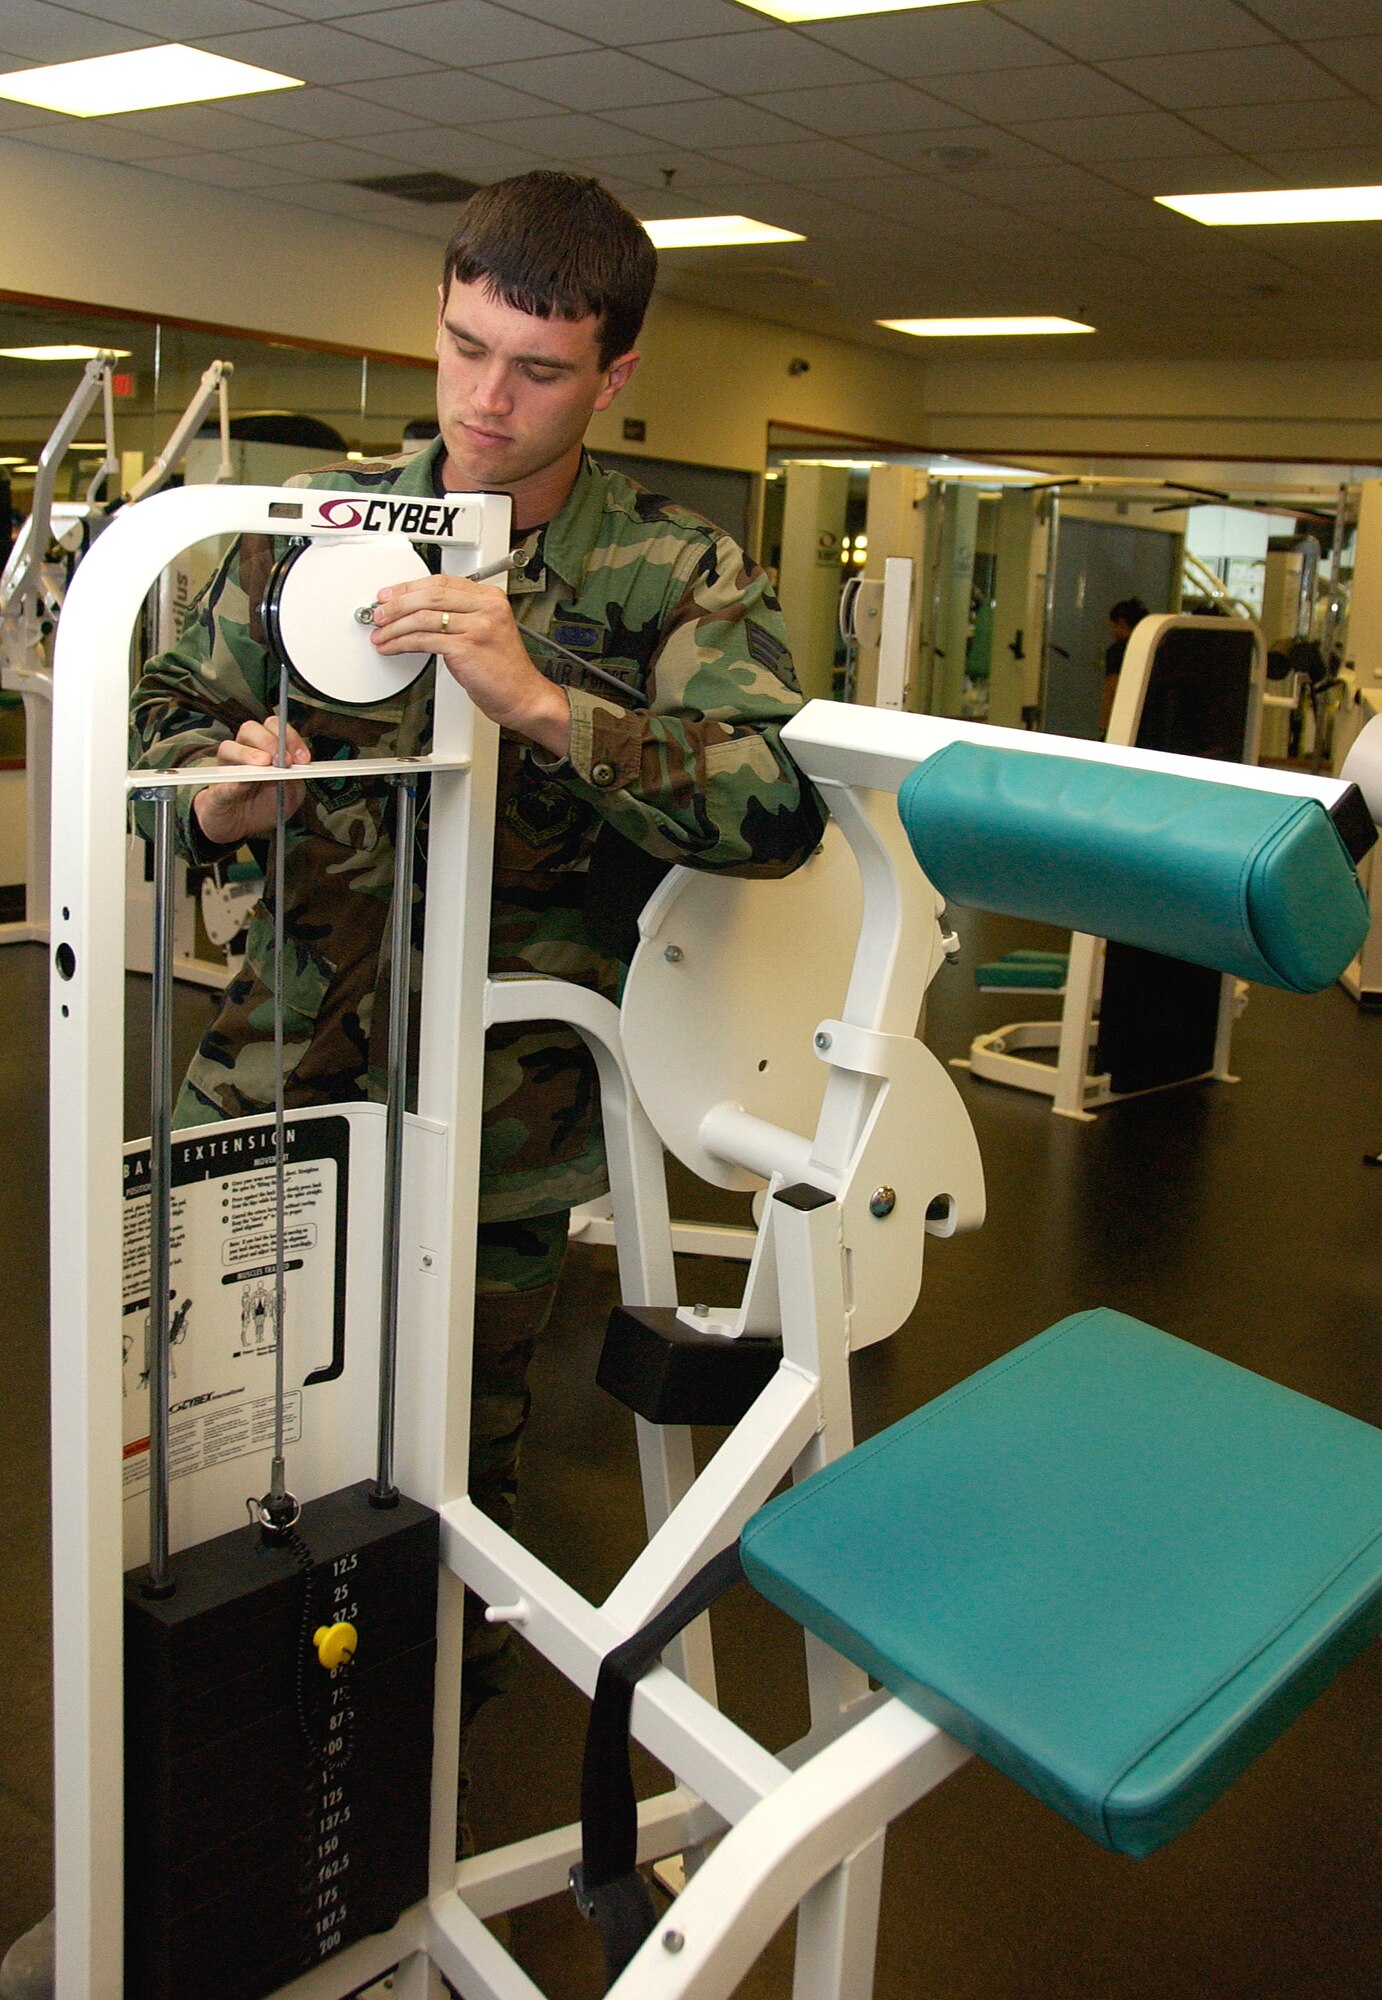 ANDERSEN AIR FORCE BASE, Guam -- Senior Airman Jonathan Ardis, 36th Force Support Squadron fitness specialist, tightens bolts on exercise equipment at the Coral Reef Fitness Center April 20. Airman Ardis recently rendered first aid to individuals in a car accident on Route 1 until first responders arrived April 13. (U.S. Air Force photo by Airman Carissa Wolff)                            